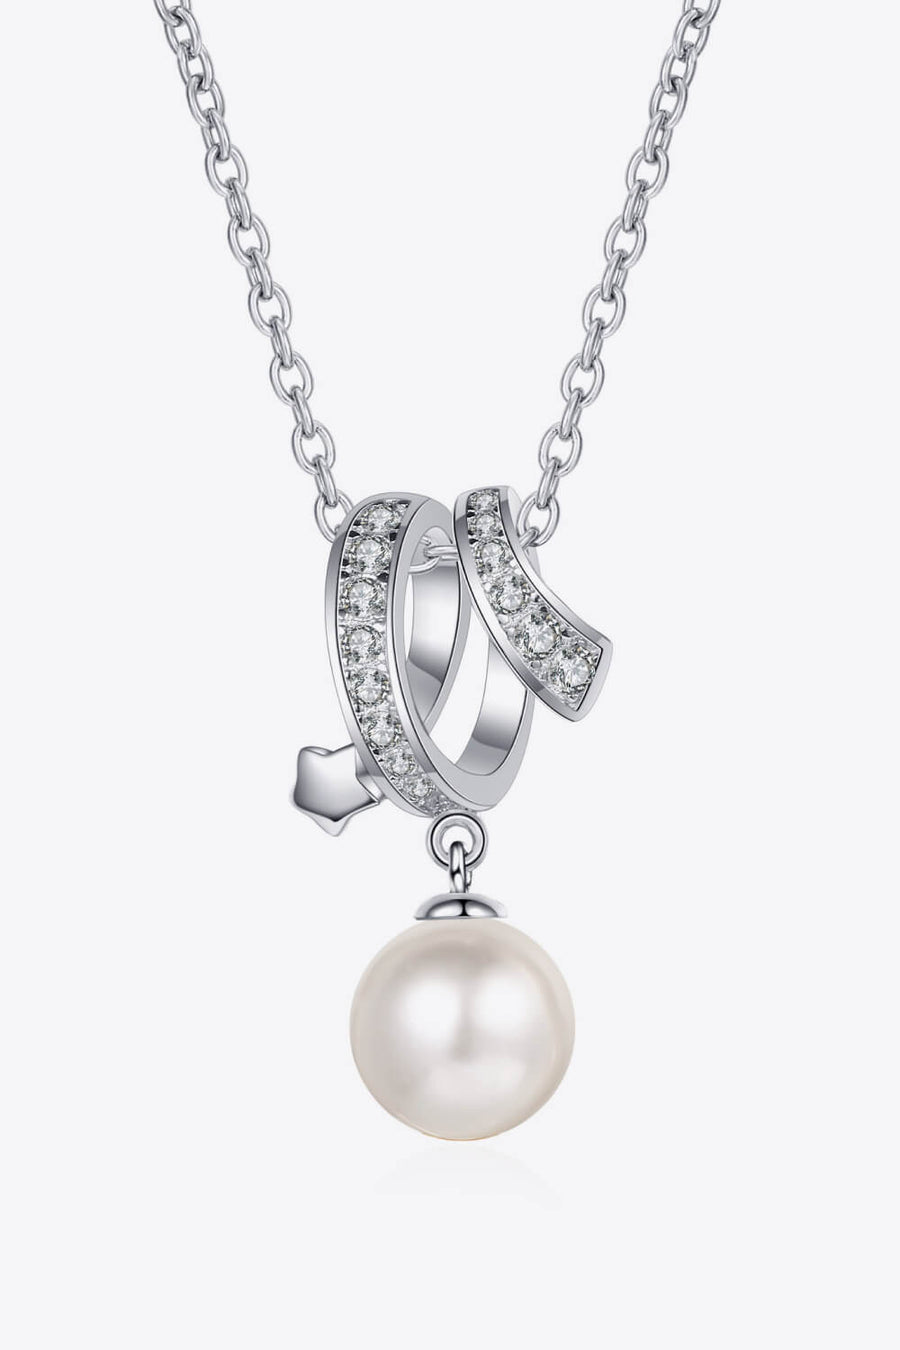 Best Diamond Pearl Pendant Necklace Jewelry Gifts for Women | 0.24 Carat Diamond Pearl Pendant Necklace - Give You A Chance | MASON New York